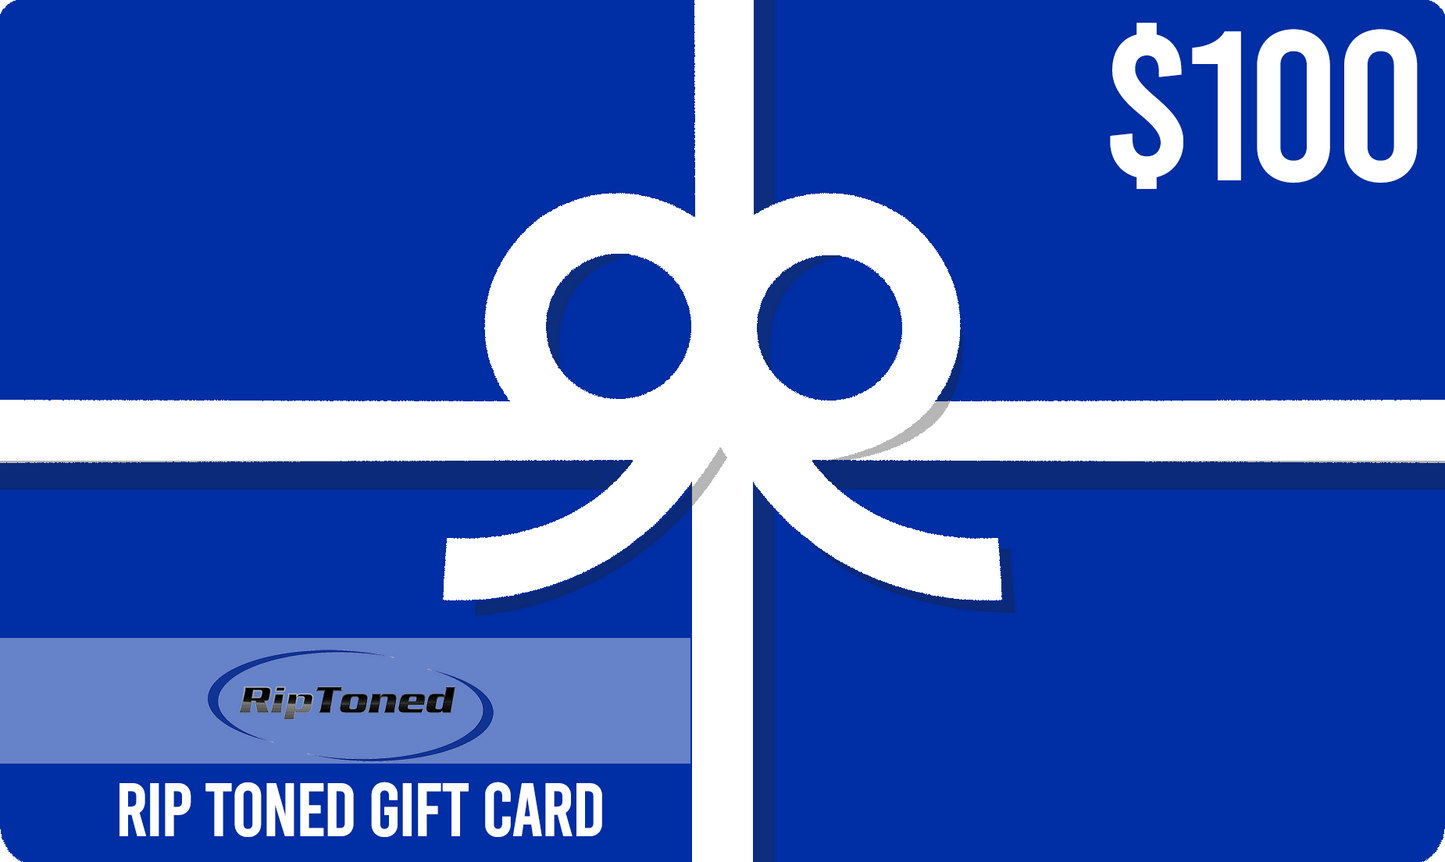 Rip Toned Gift Cards - Rip Toned